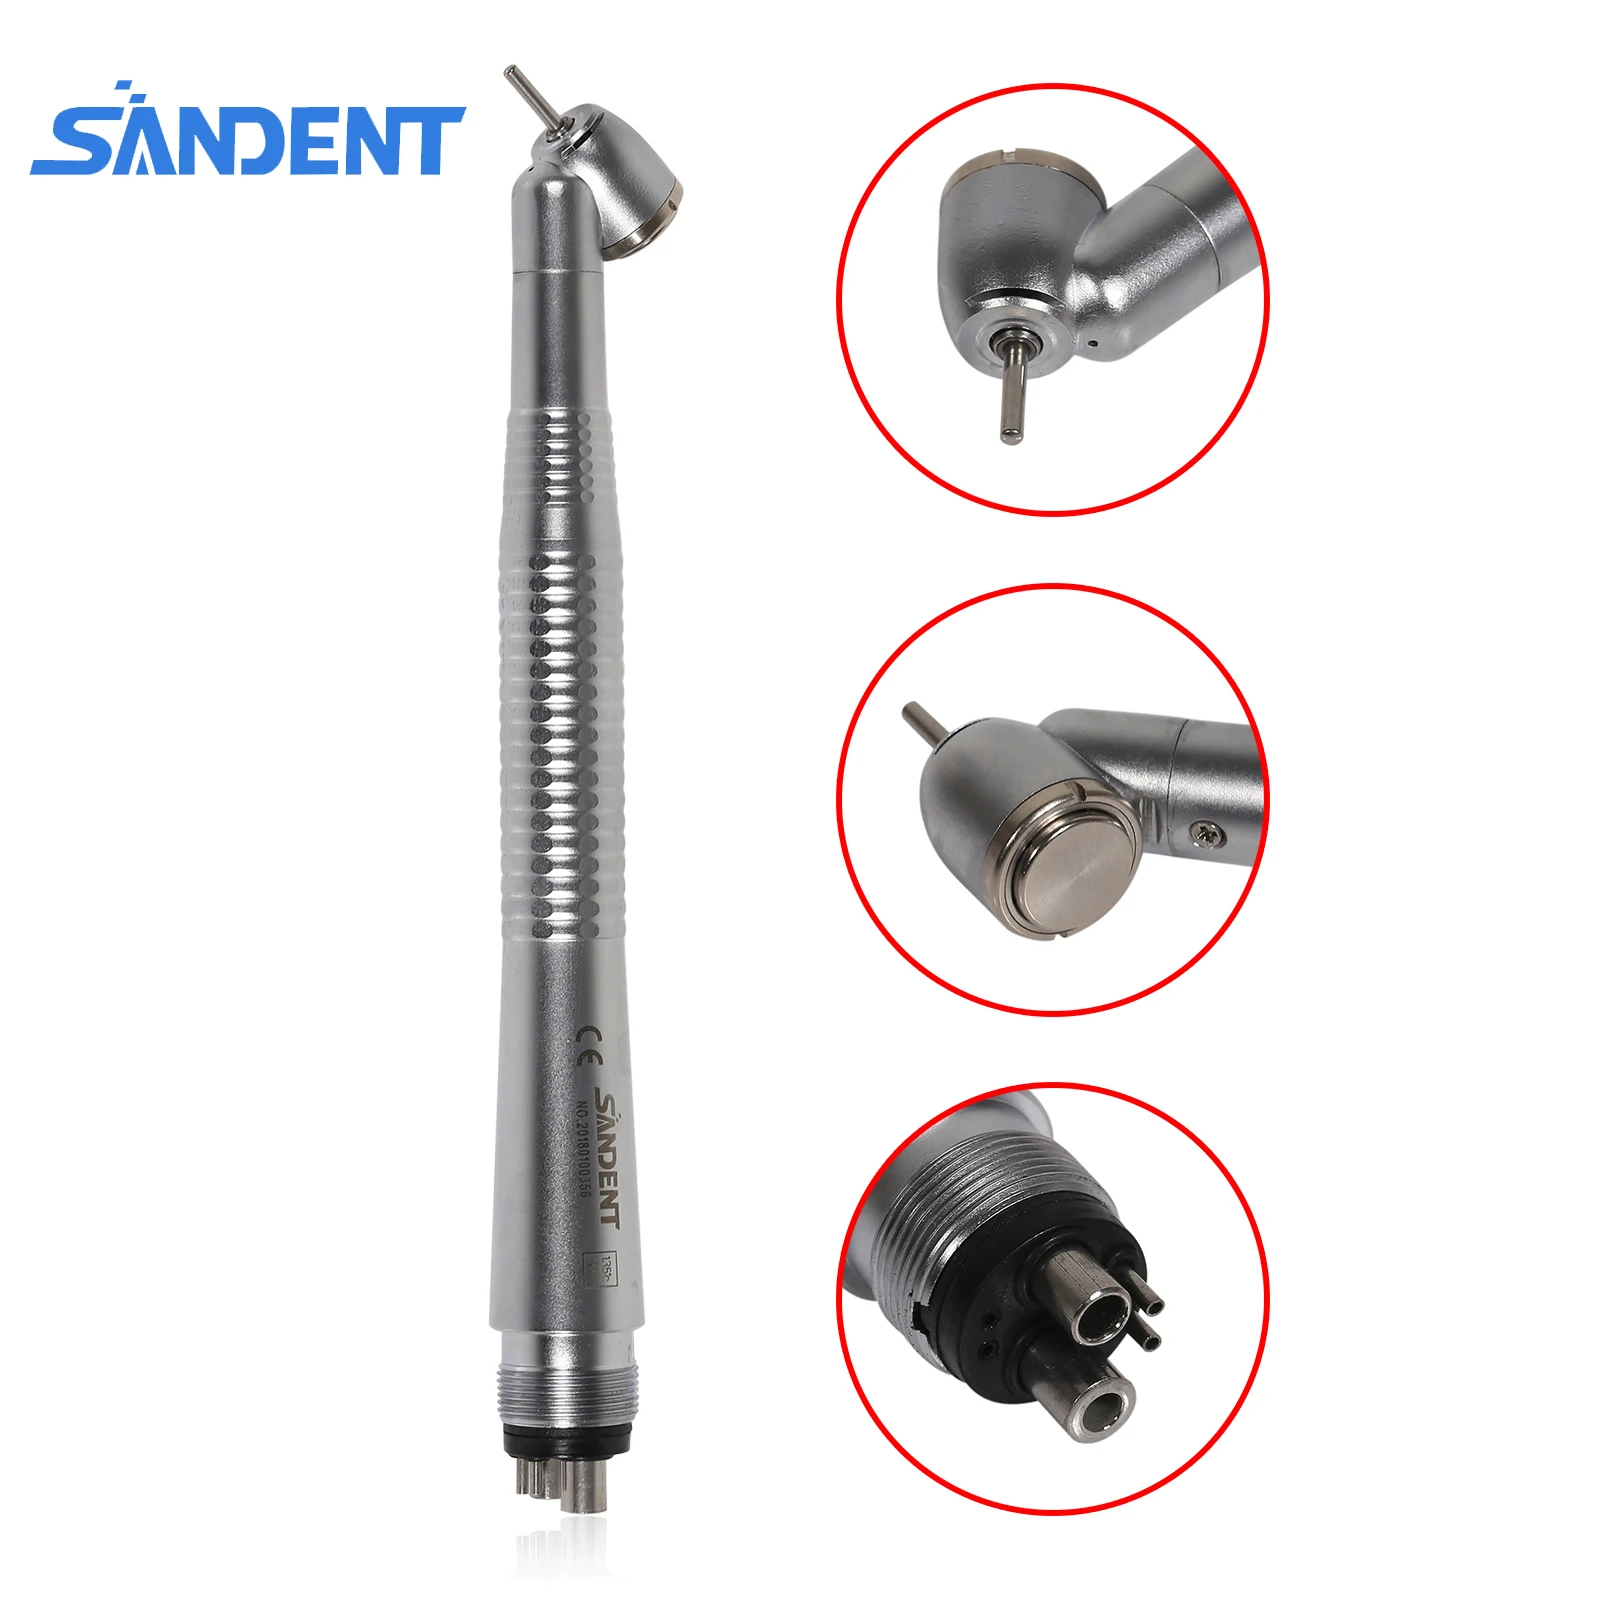 SANDENT Dental High Speed Handpiece 45 Degree Head 4 Hole Single Water Spring Push Button Type Dentist Turbine Fit NSK CA4 being dental 16 1 led fiber optic low speed inner water push button contra angle endodontic handpiece rose 202car16b kavo nsk